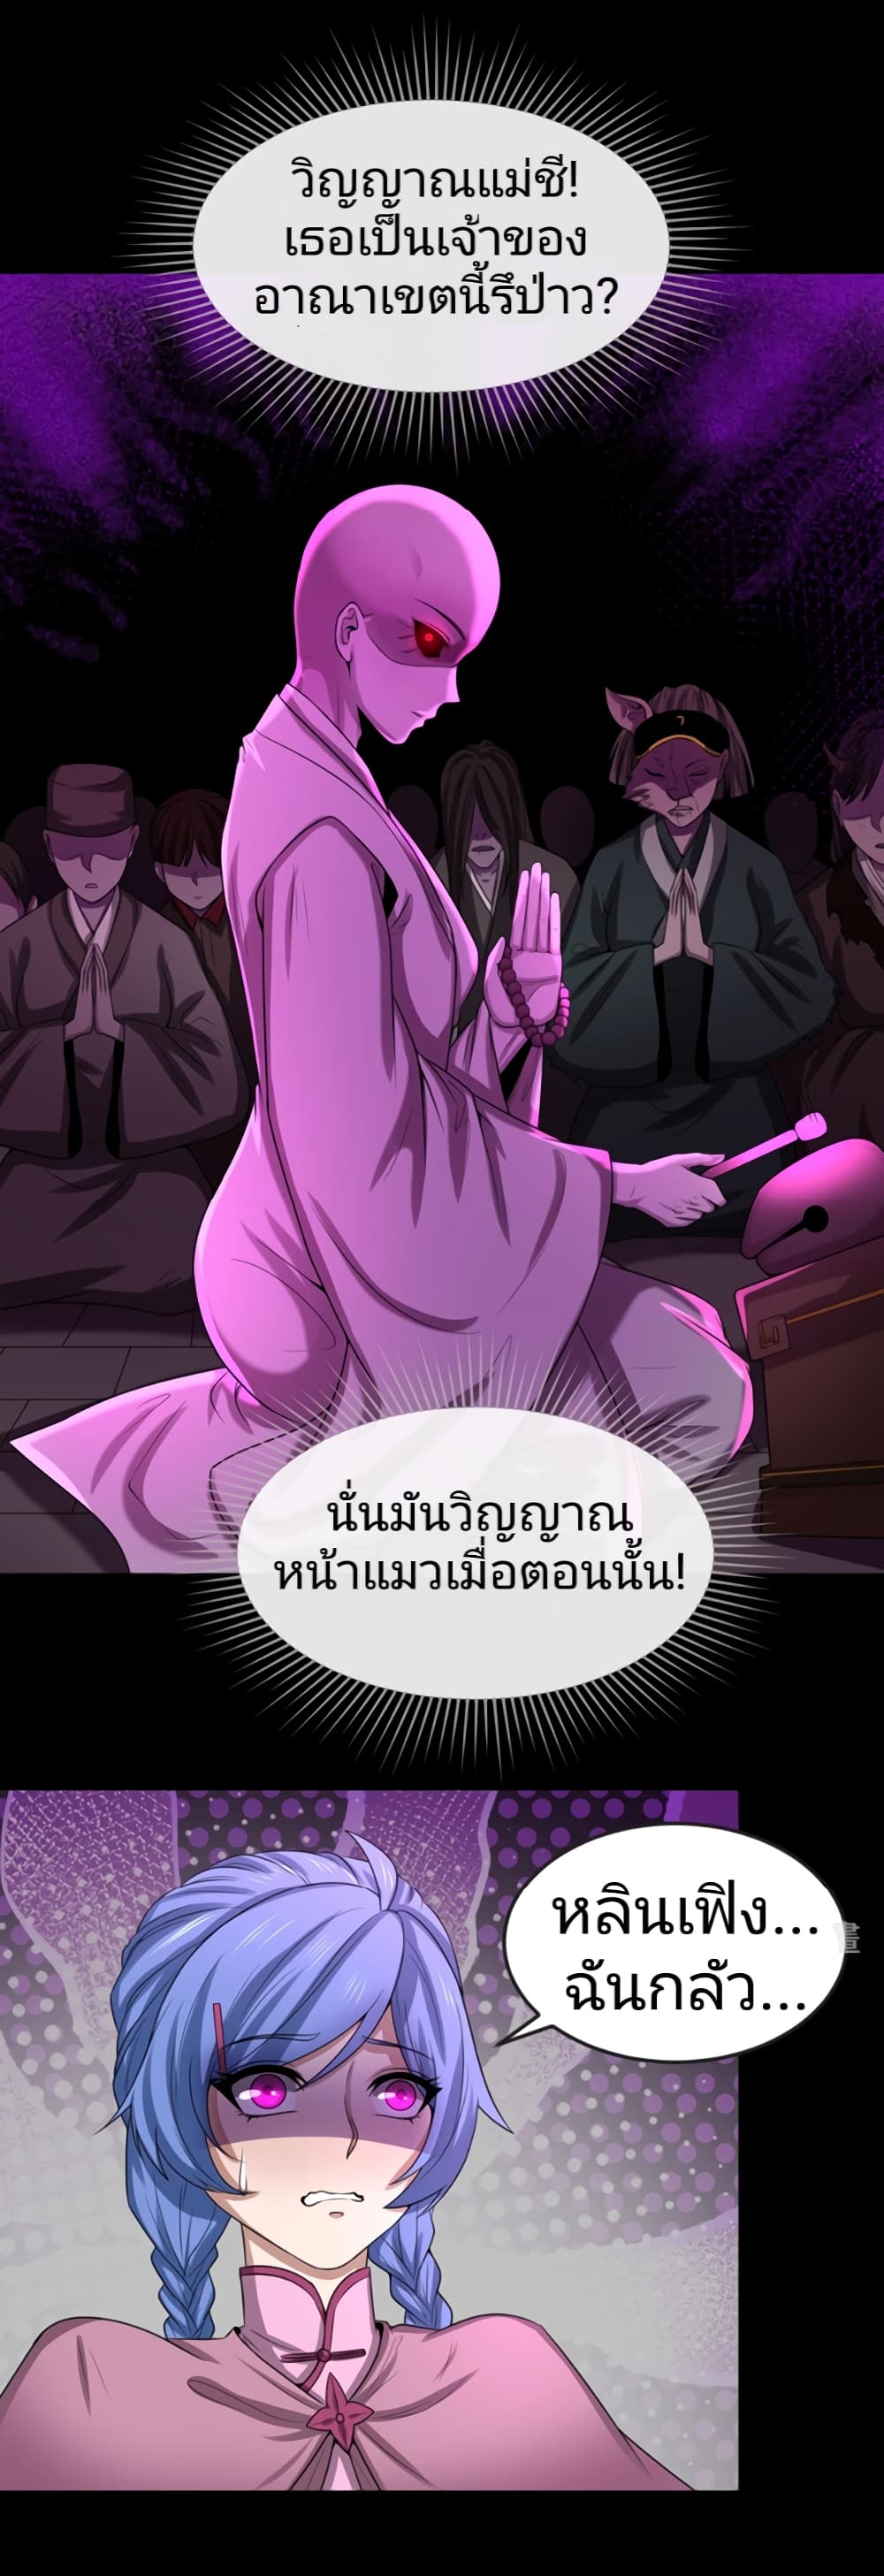 The Age of Ghost Spirits à¸à¸­à¸à¸à¸µà¹ 43 (26)